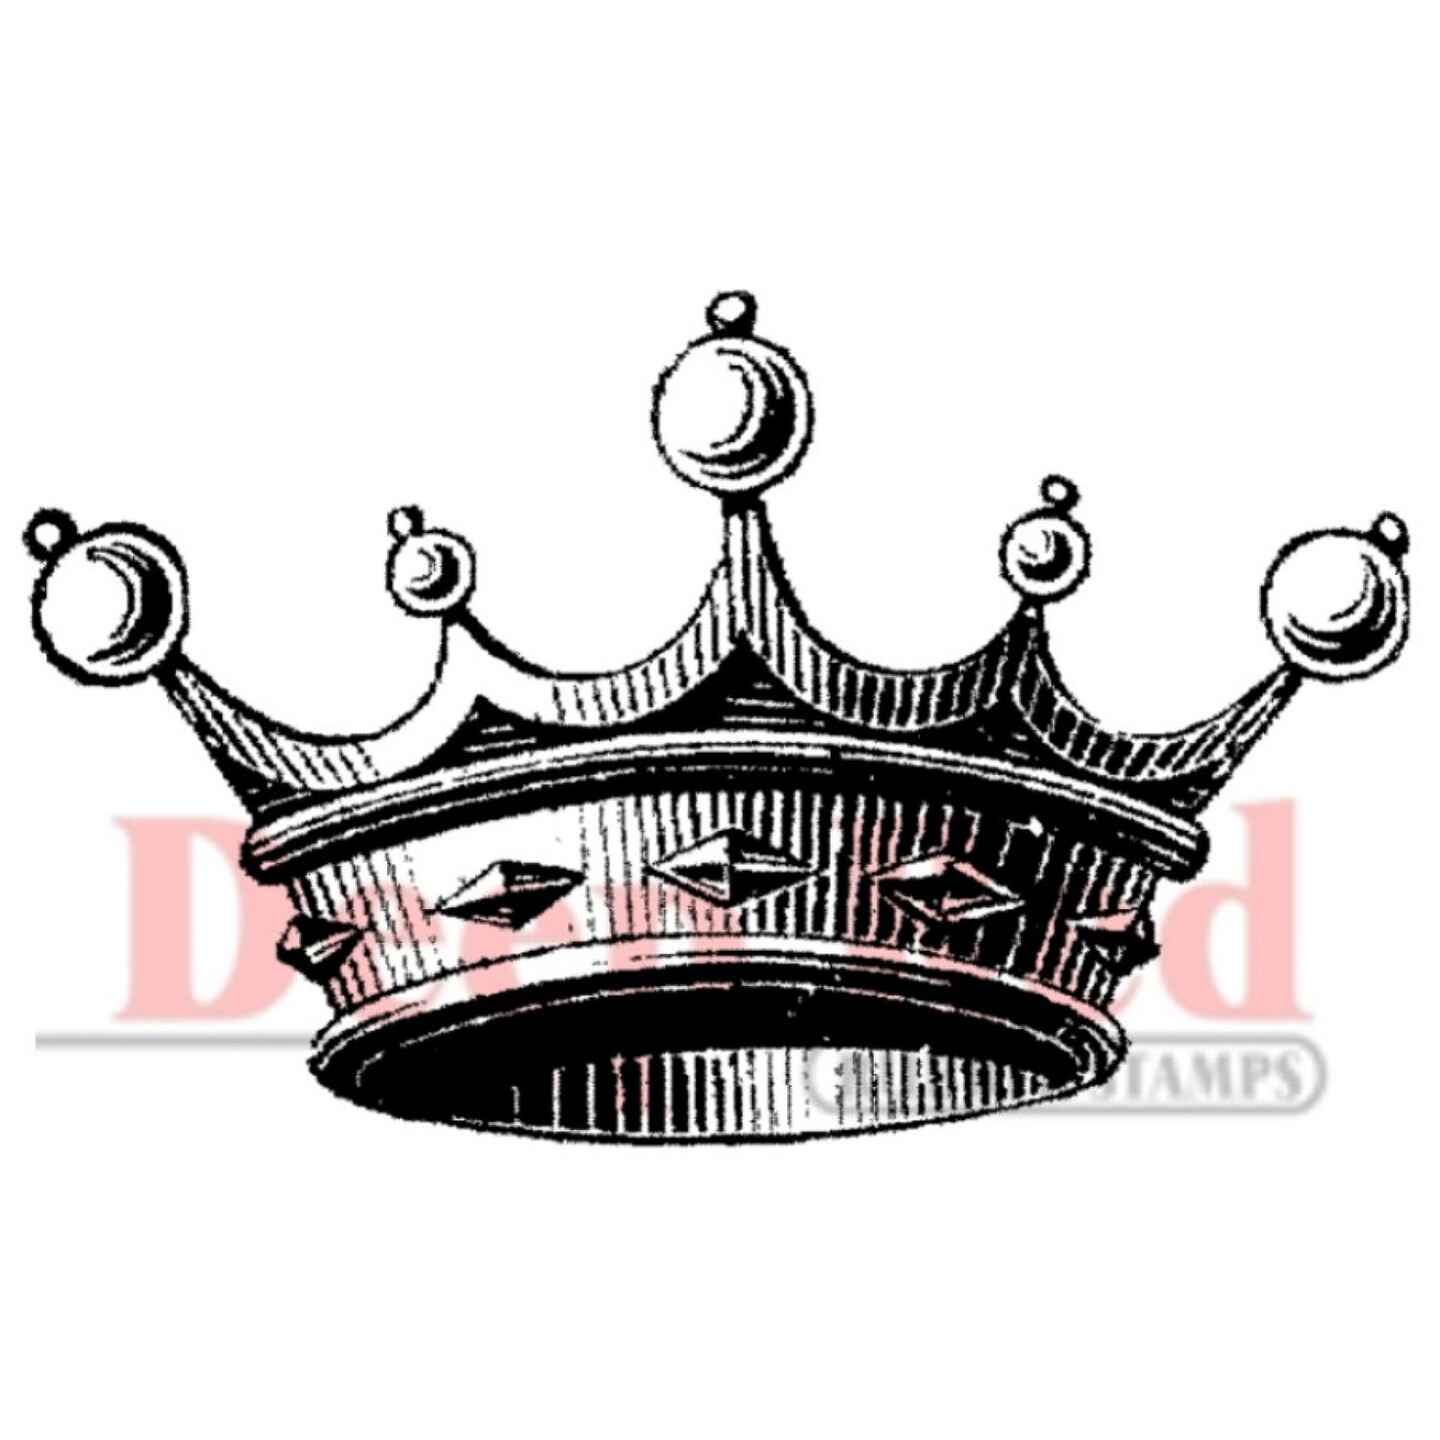 Deep Red Stamps Crown for Royalty Rubber Cling Stamp 2.6 x 1.4 inches ...